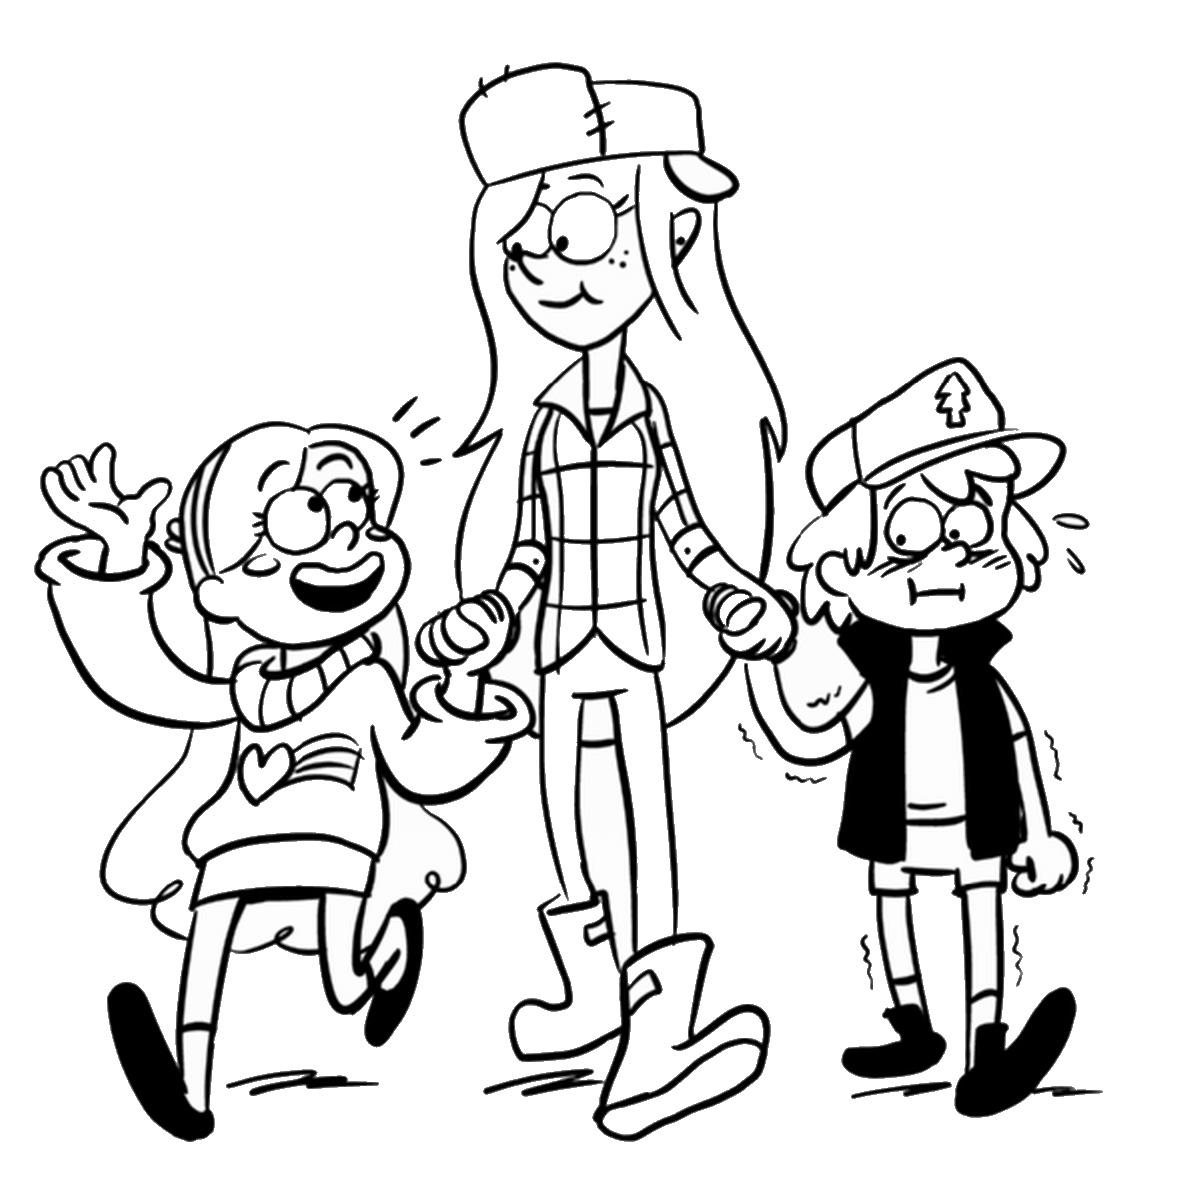 Dipper, mabel and wendy